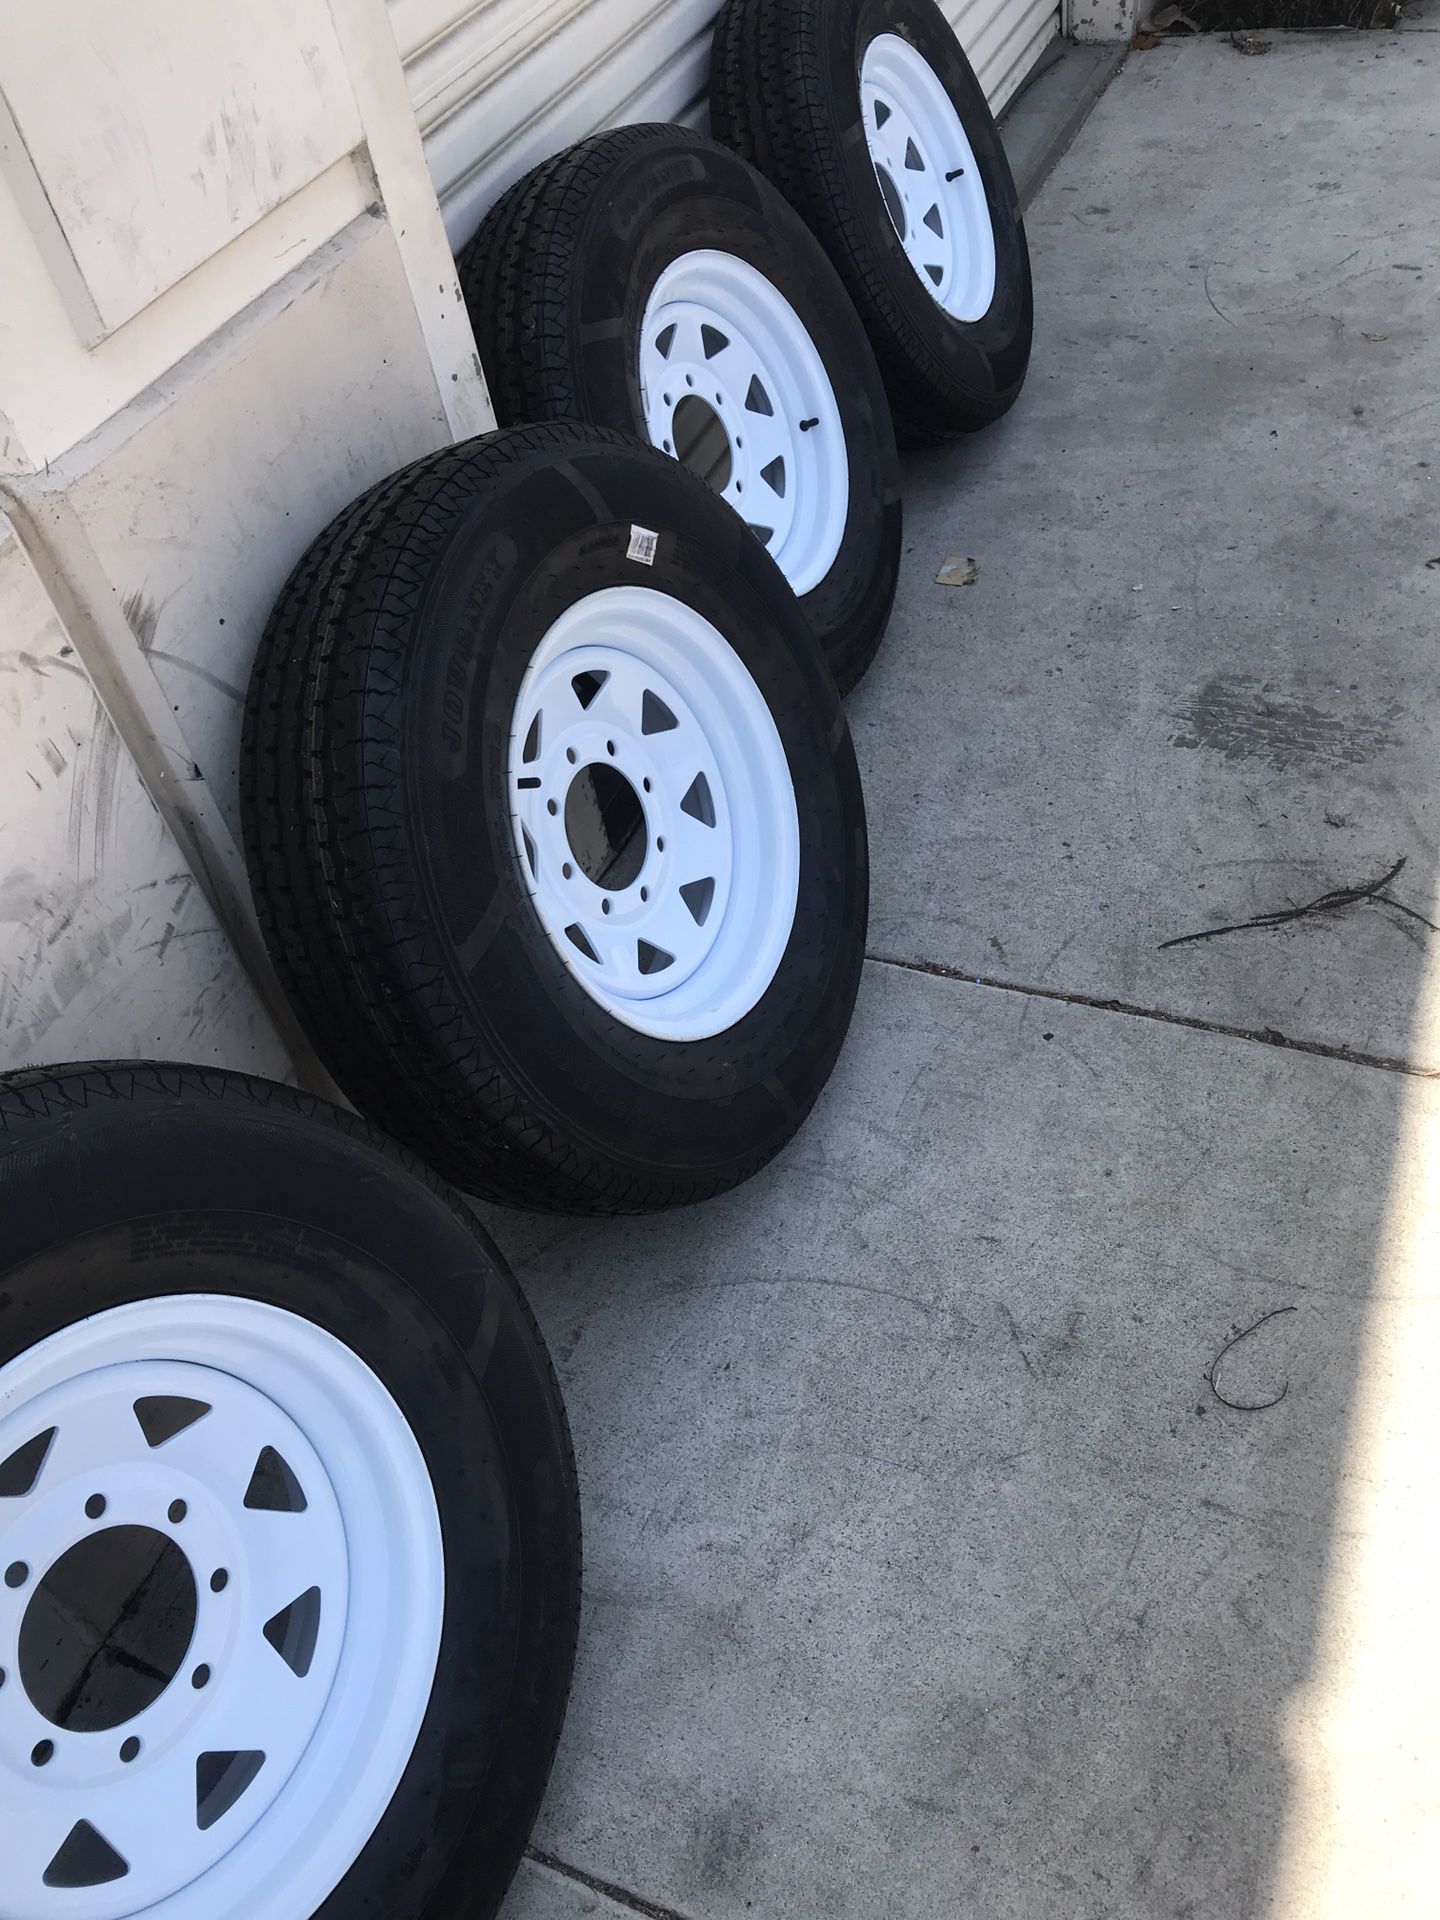 4x ST trailer tire 235x80-16 with8 lugs wheels $740 no bargain price firm